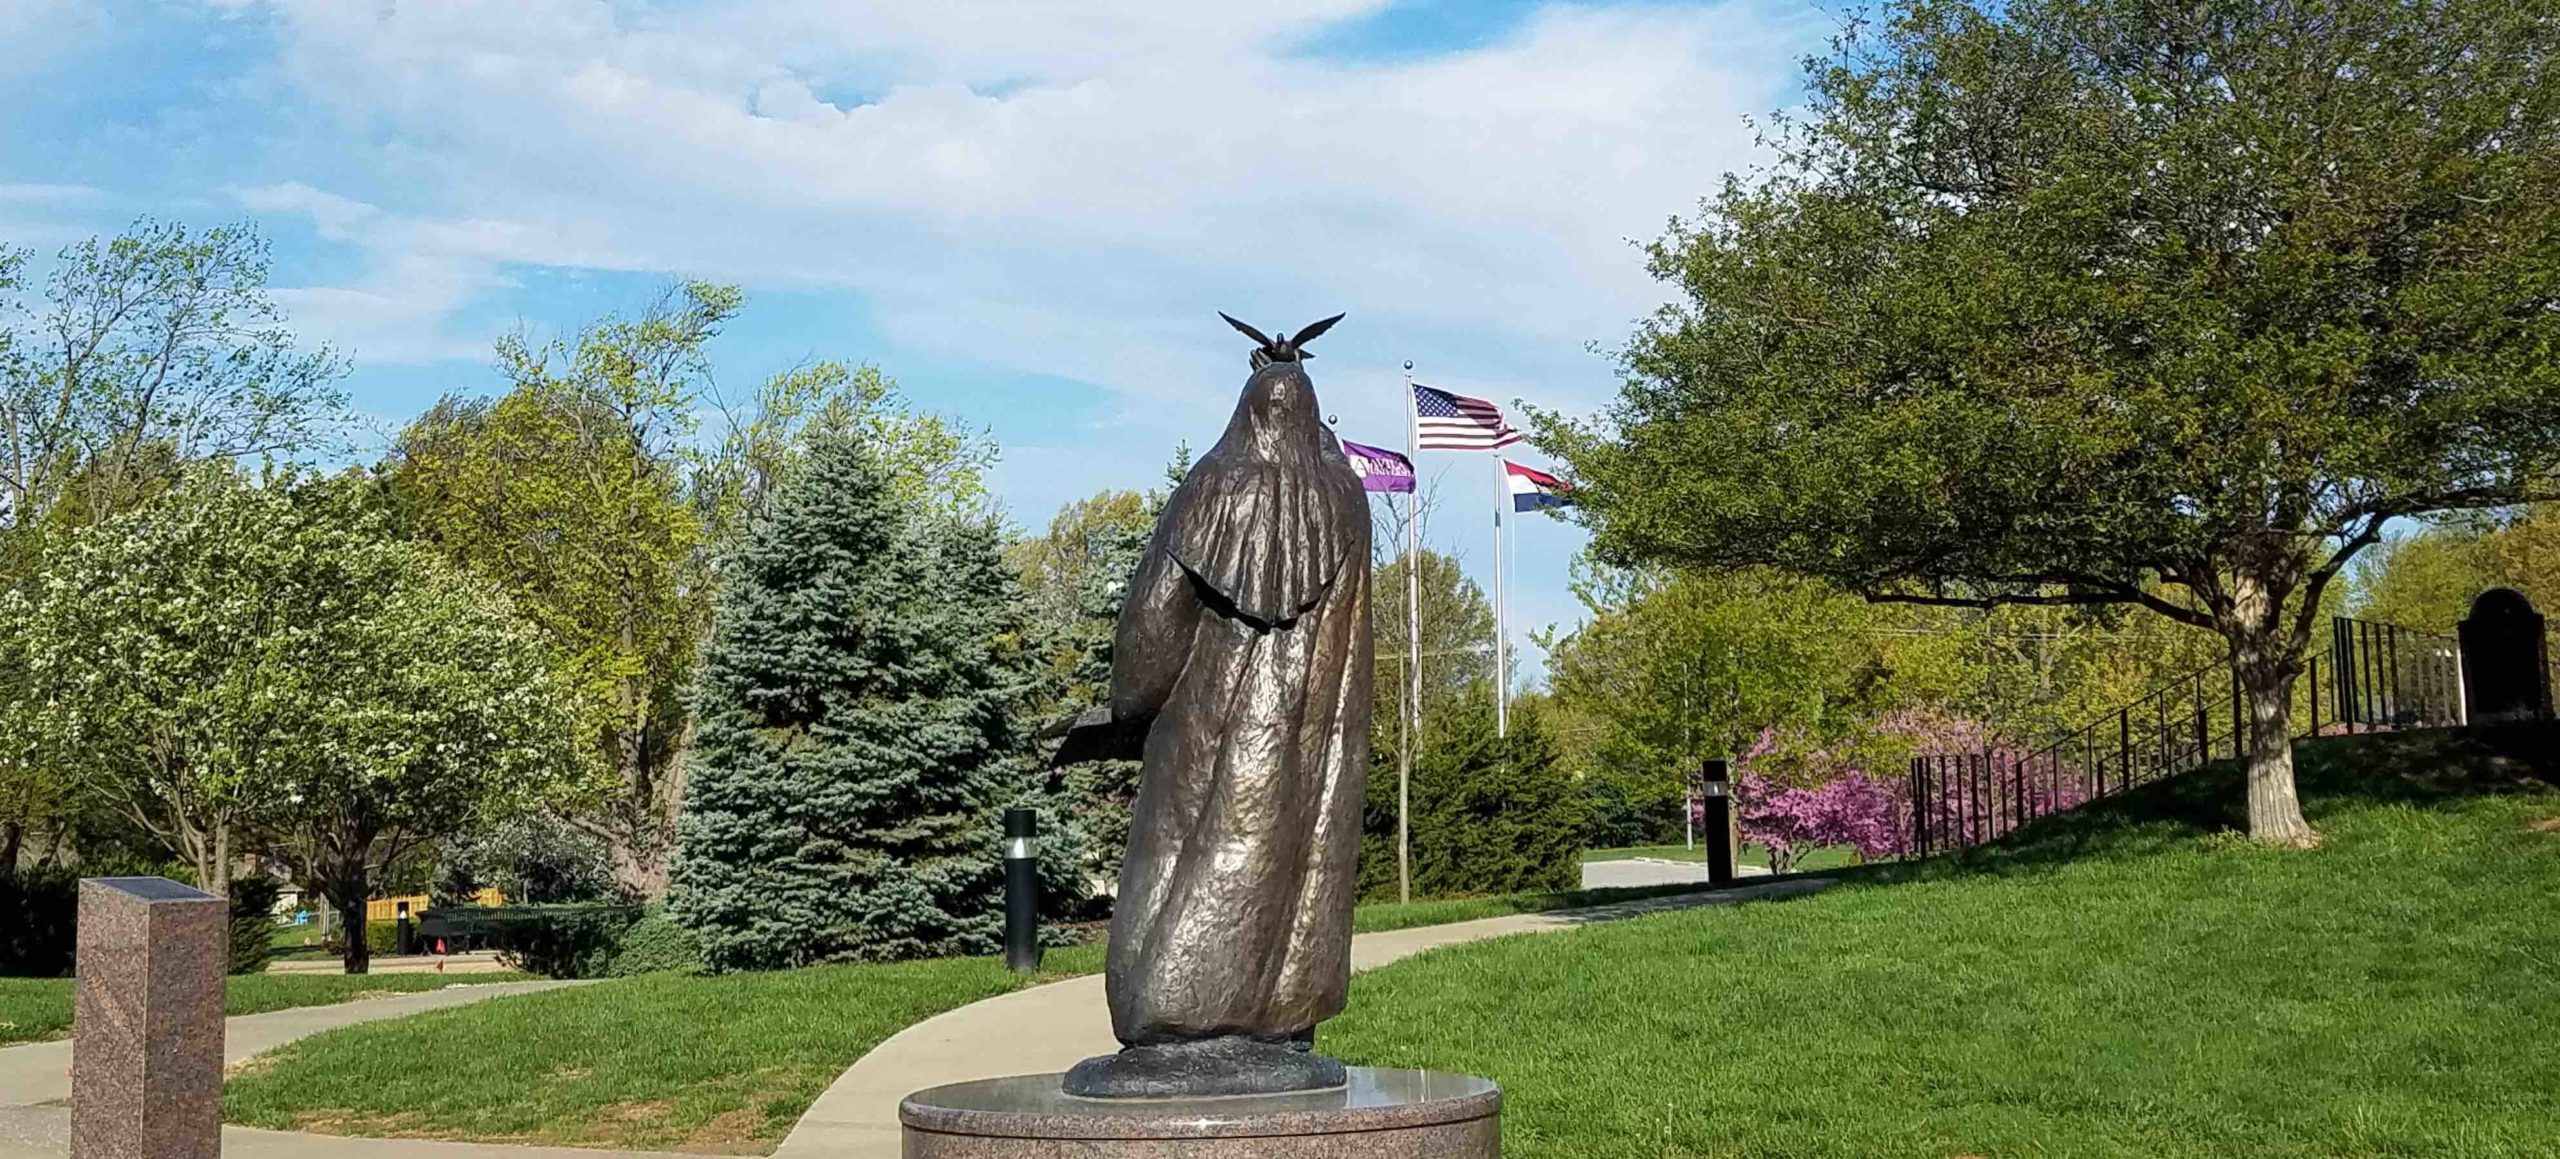 Statue of St. Teresa of Avila on campus with flag poles in the background